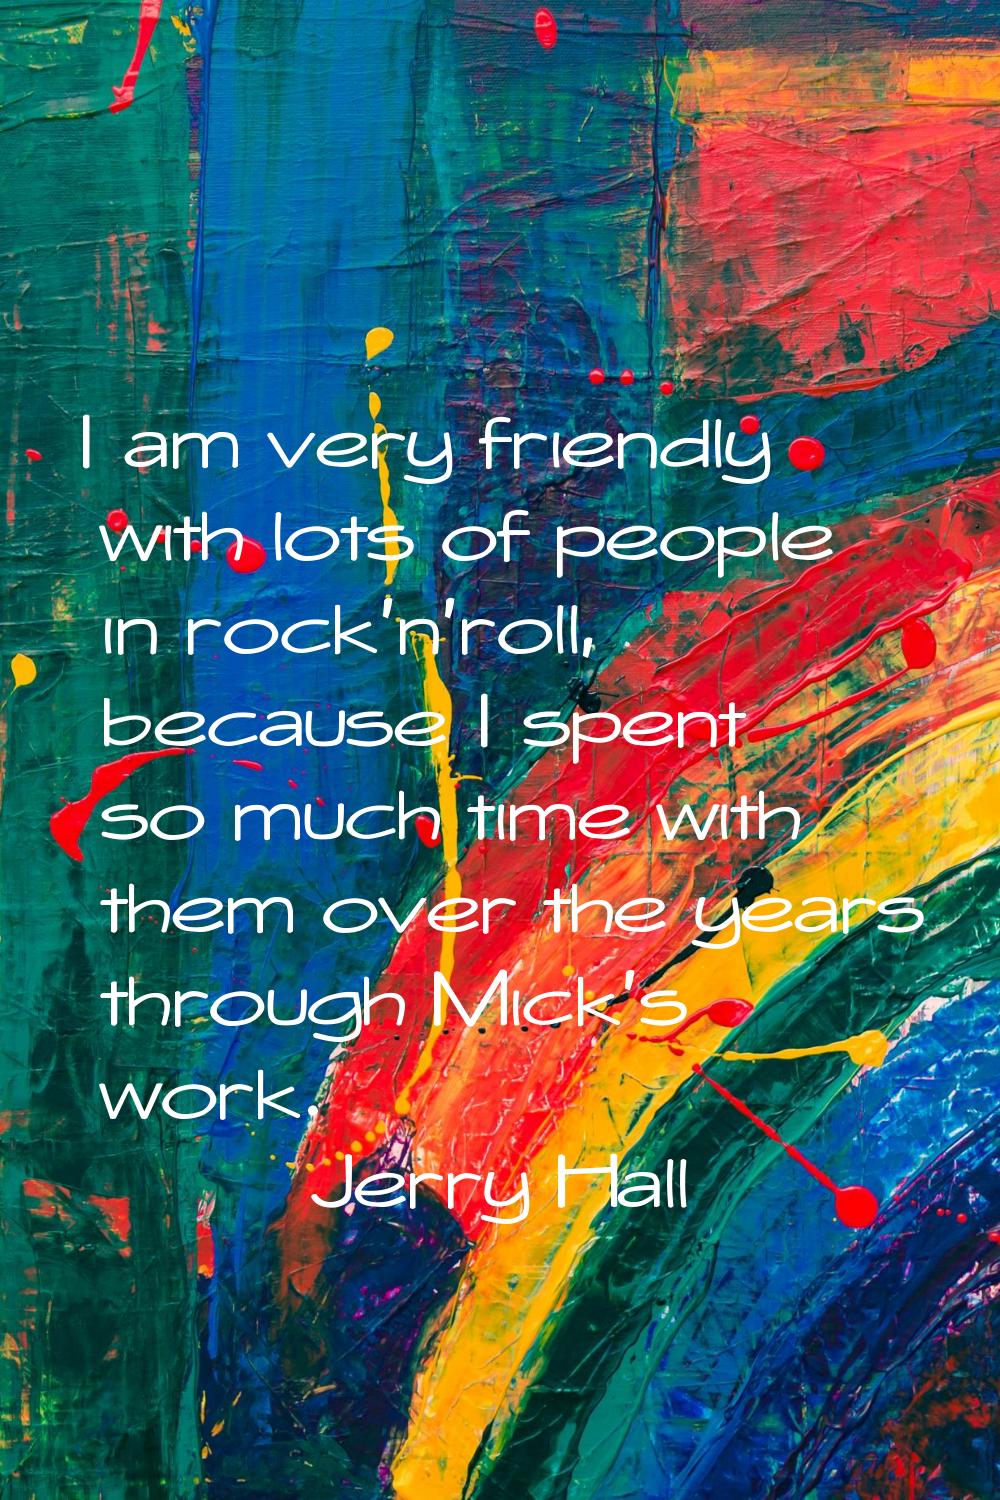 I am very friendly with lots of people in rock'n'roll, because I spent so much time with them over 